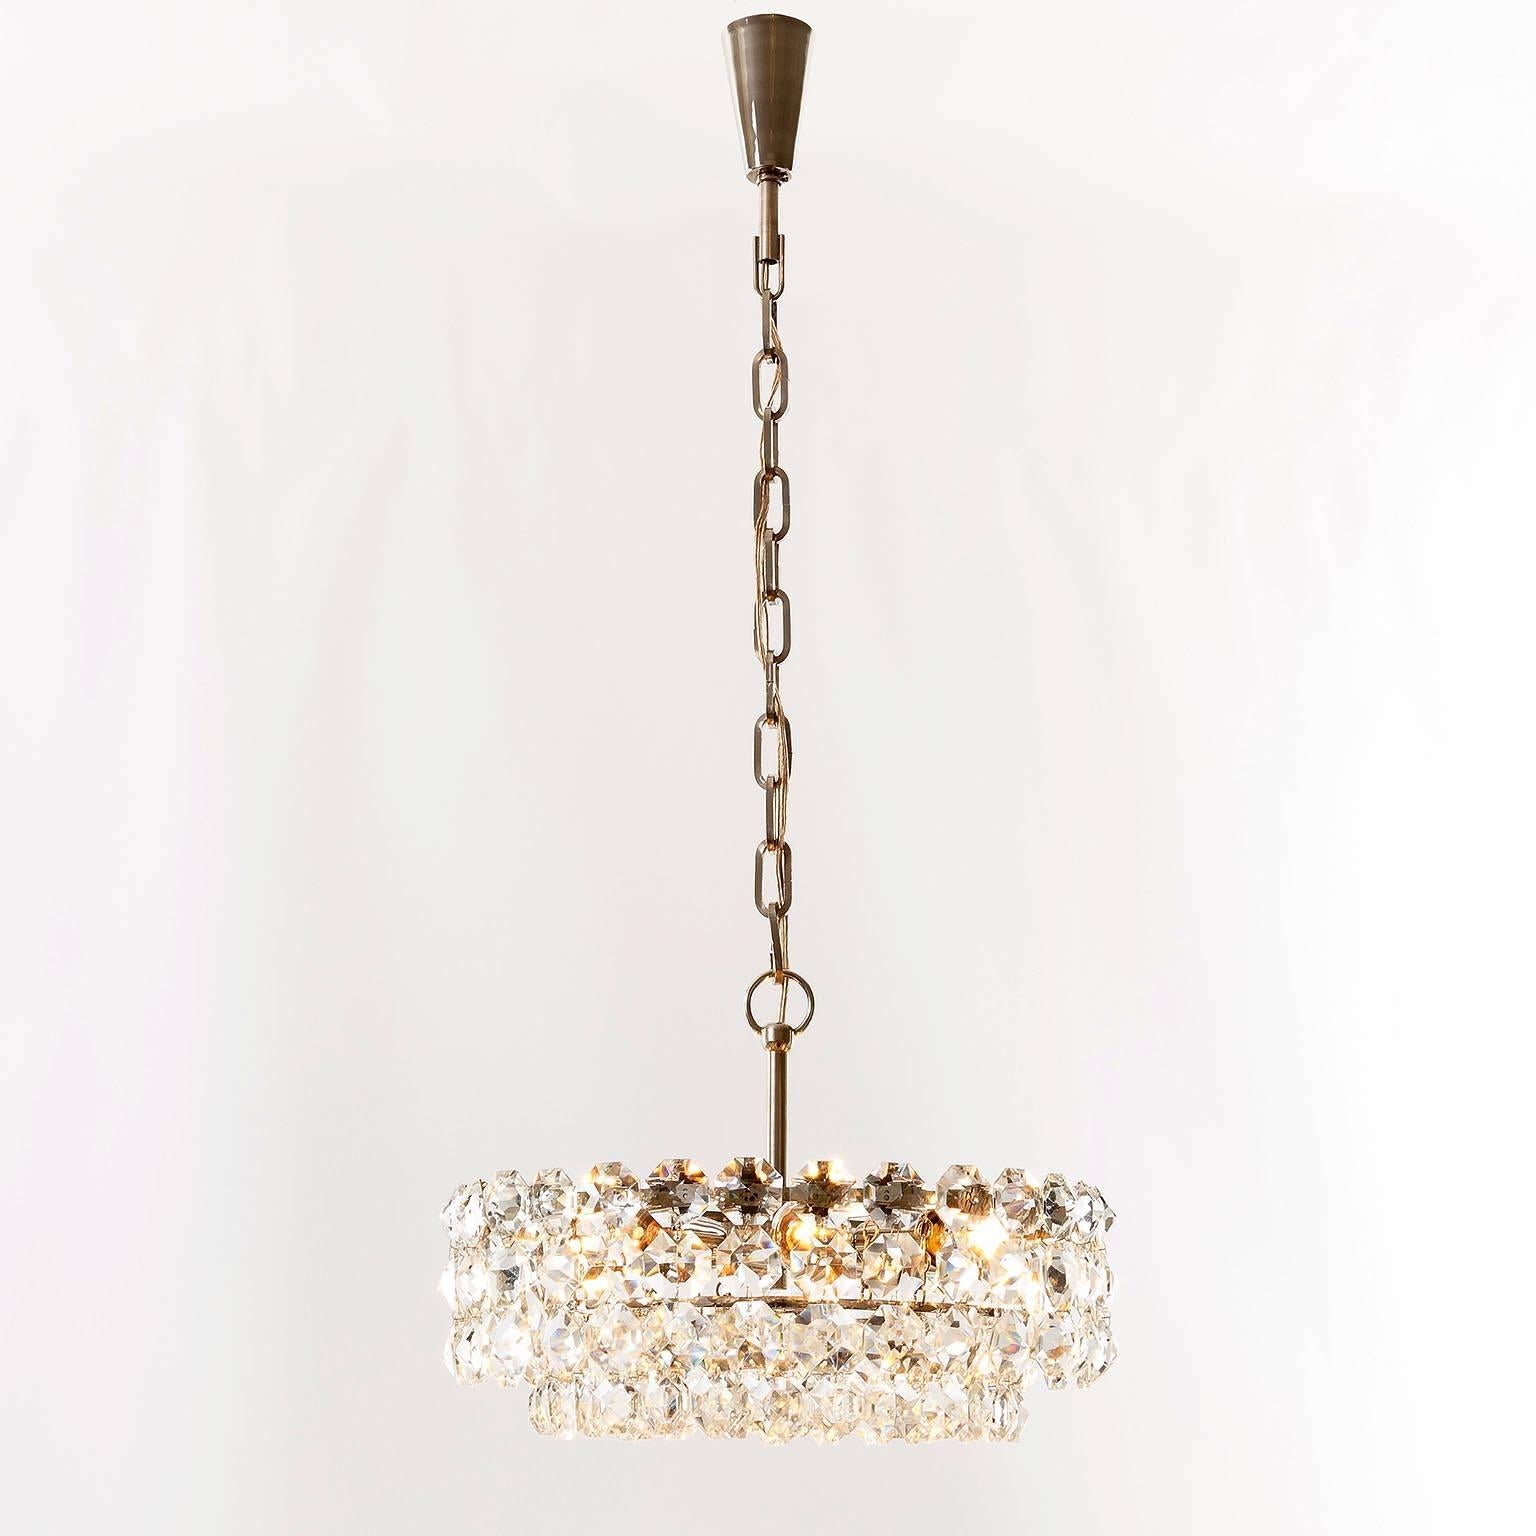 One of Two Bakalowits Chandeliers Pendant Lights, Nickel Glass, 1960s For Sale 5